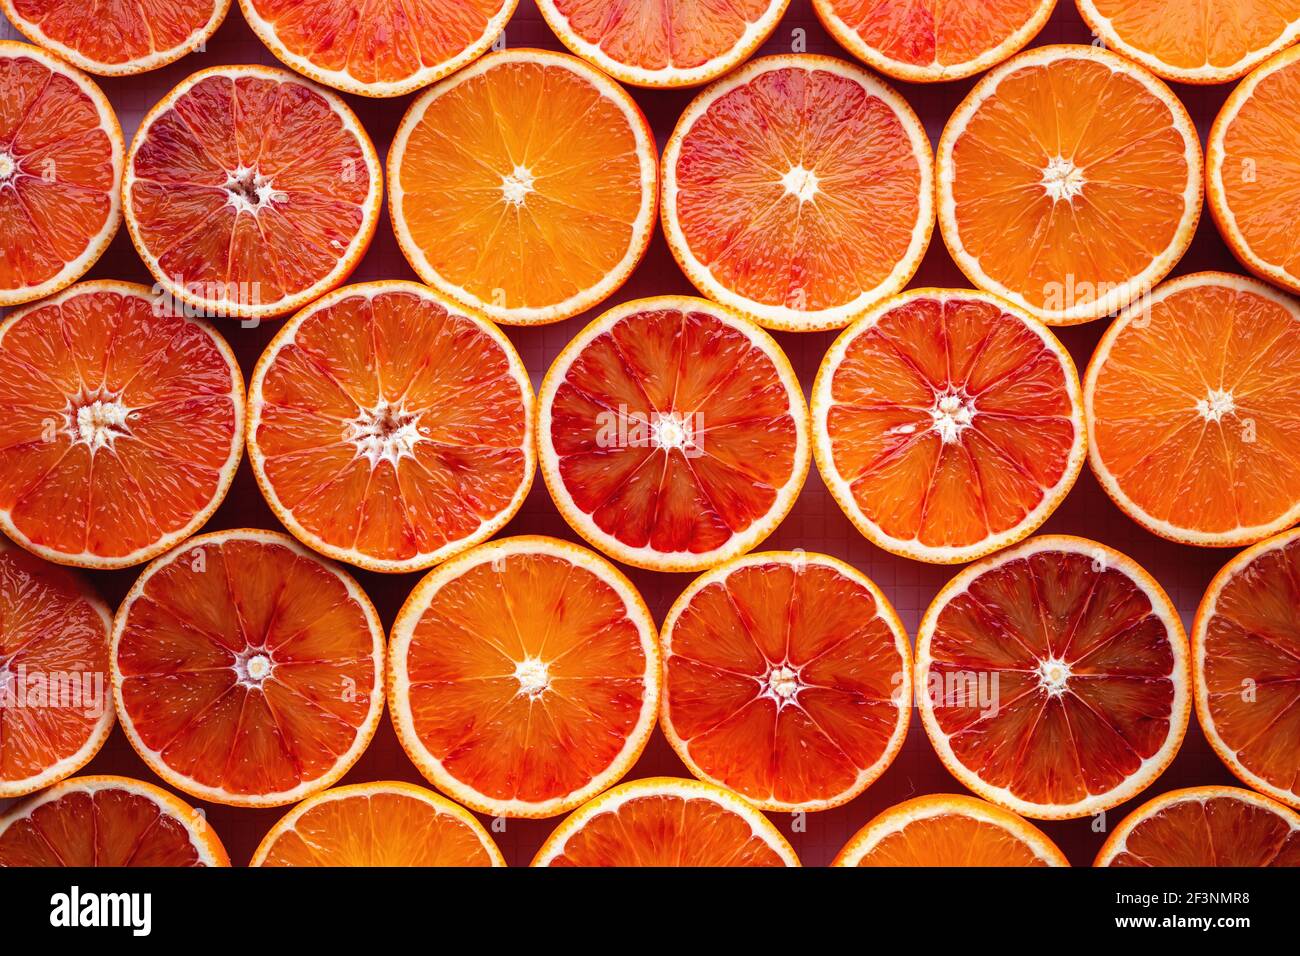 Pattern of sliced oranges prepared for juice making Stock Photo